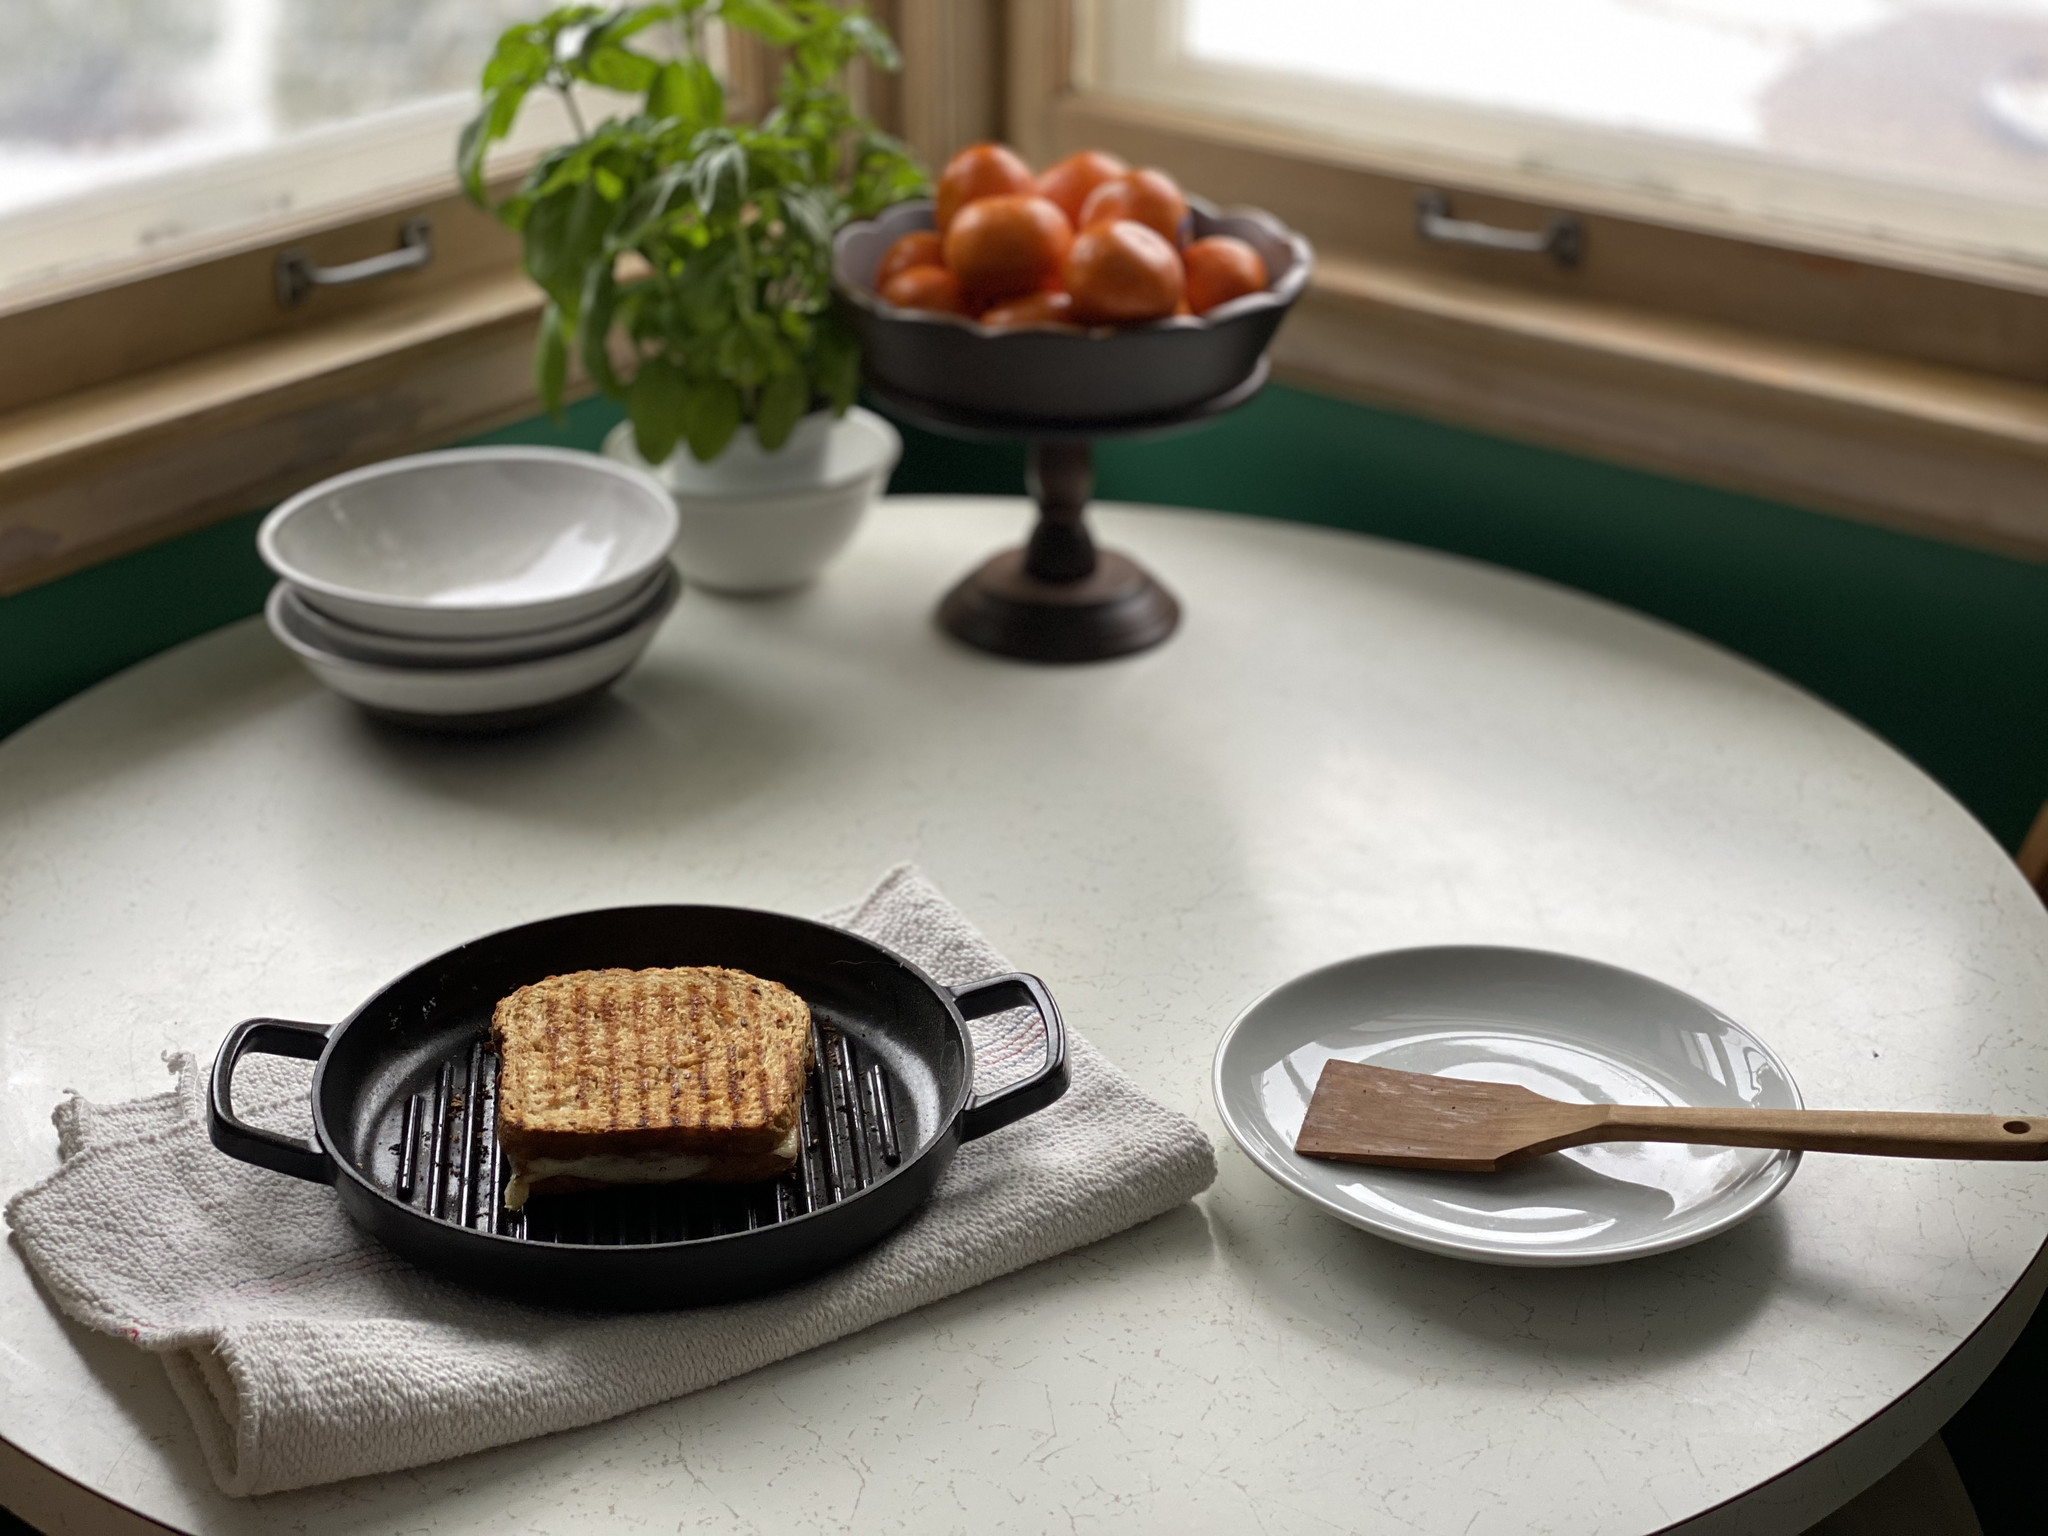 JOURNAL - Meet Crane: Exquisitely Crafted British Cookware - The Foundry  Home Goods